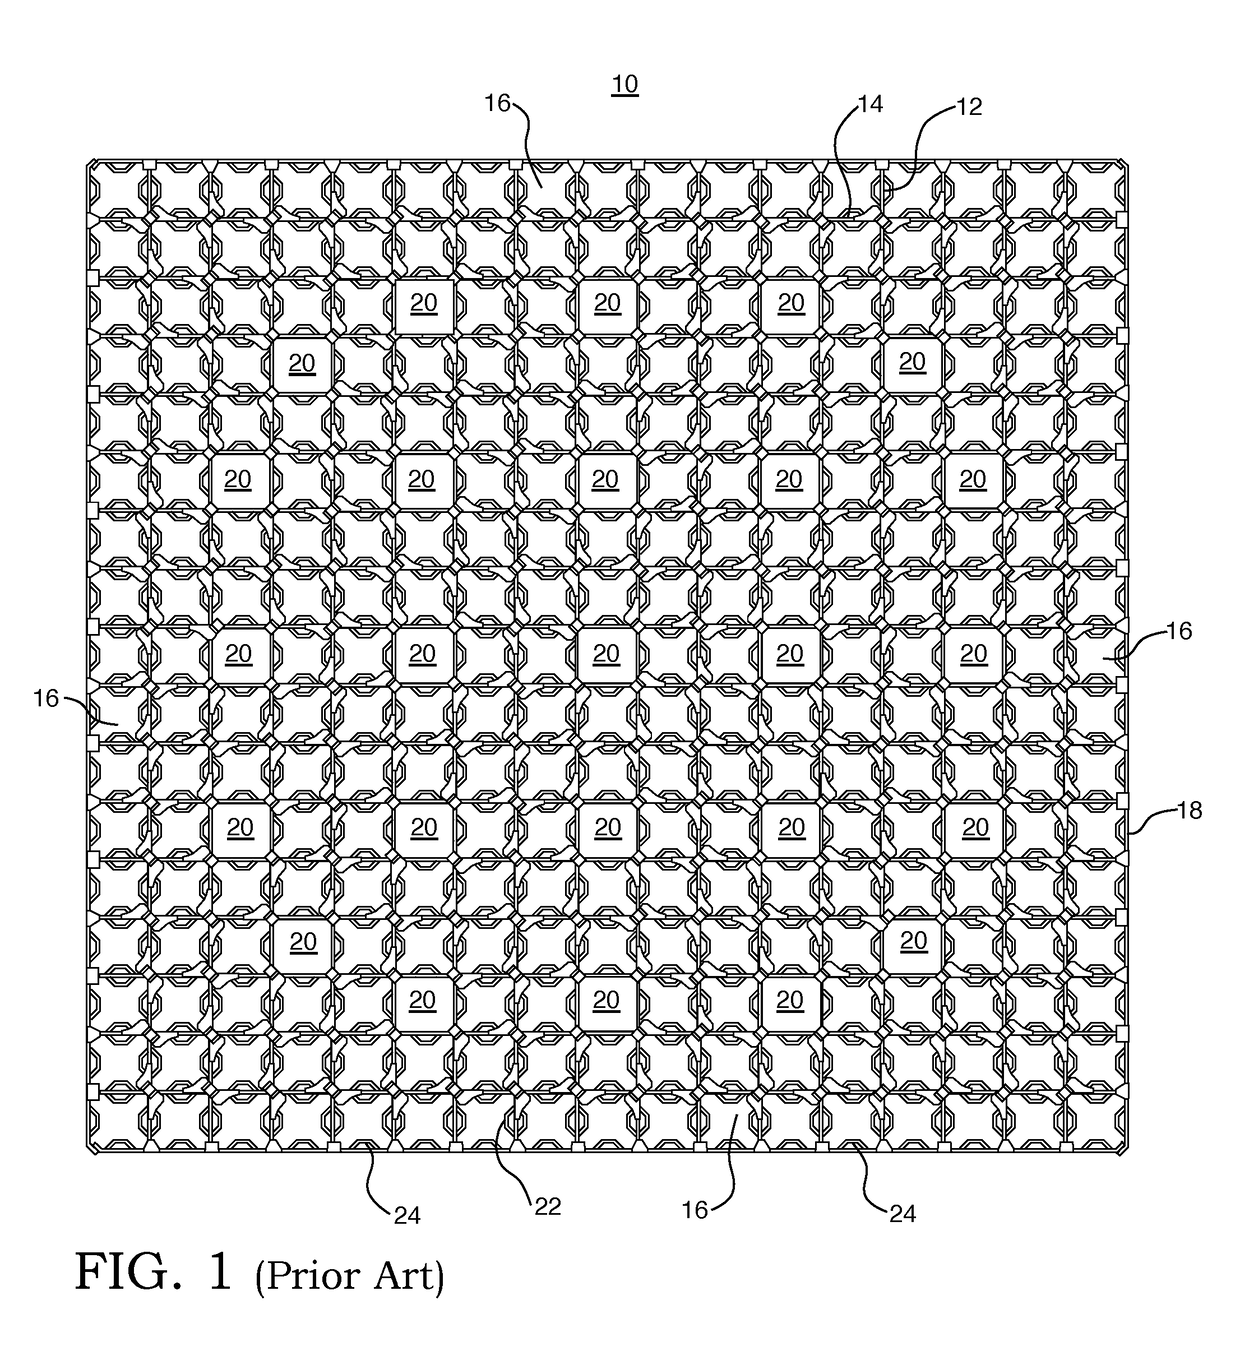 Spacer Grid Using Tubular Cells With Mixing Vanes